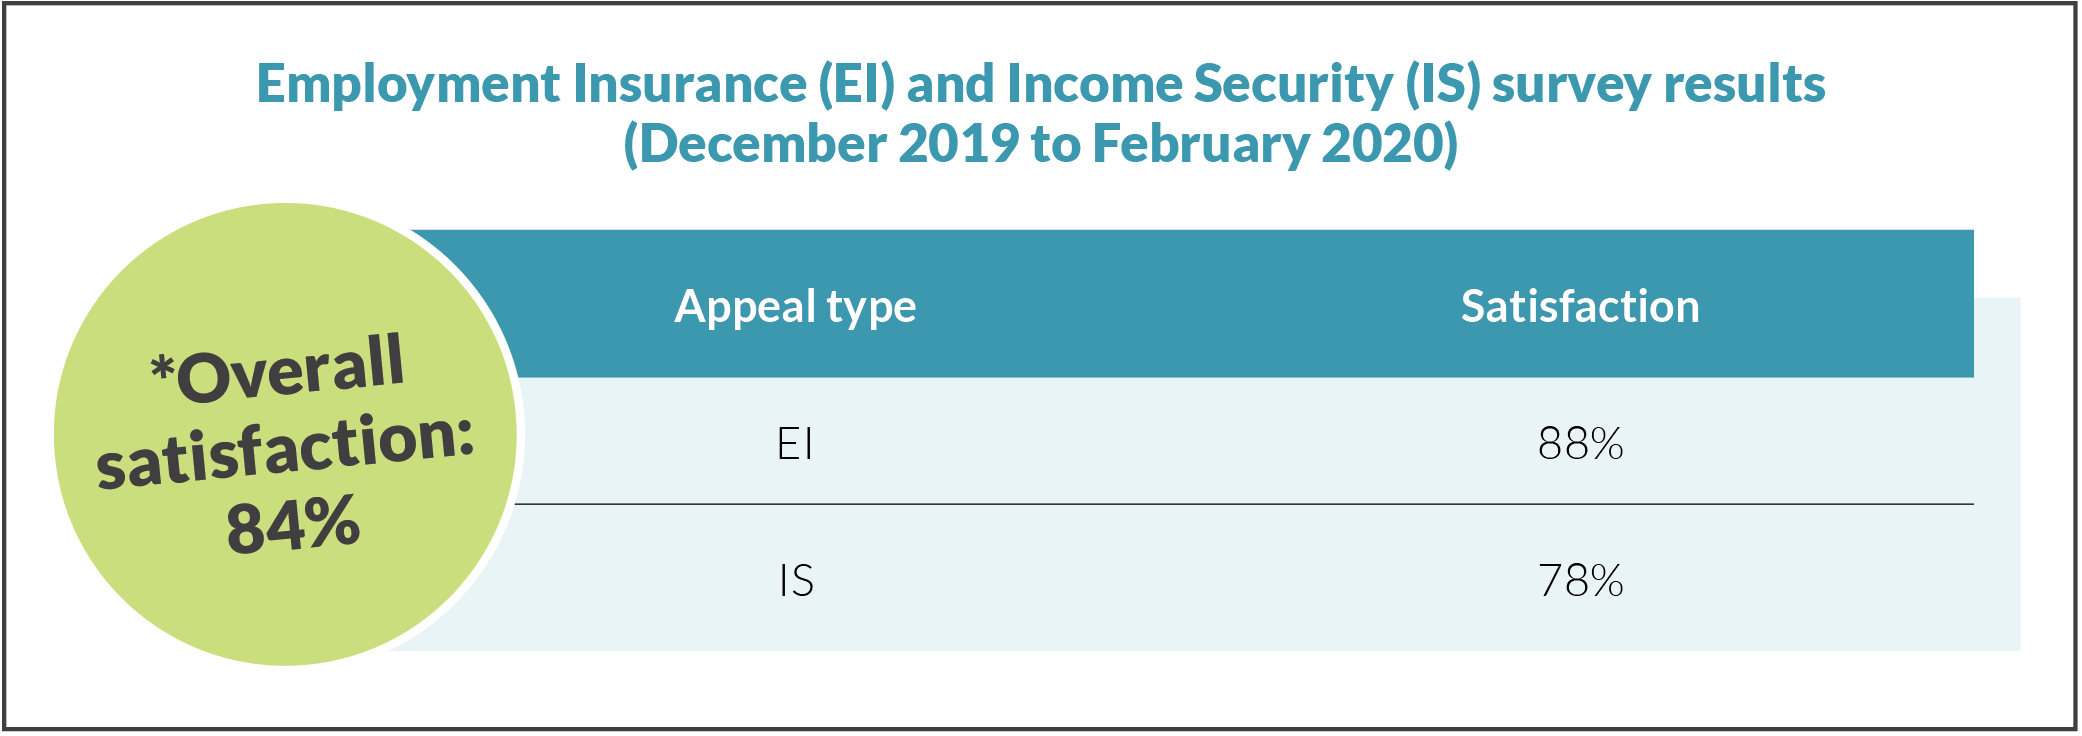 Employment Insurance (EI) and Income Security (IS) survey results (December 2019 to February 2020)